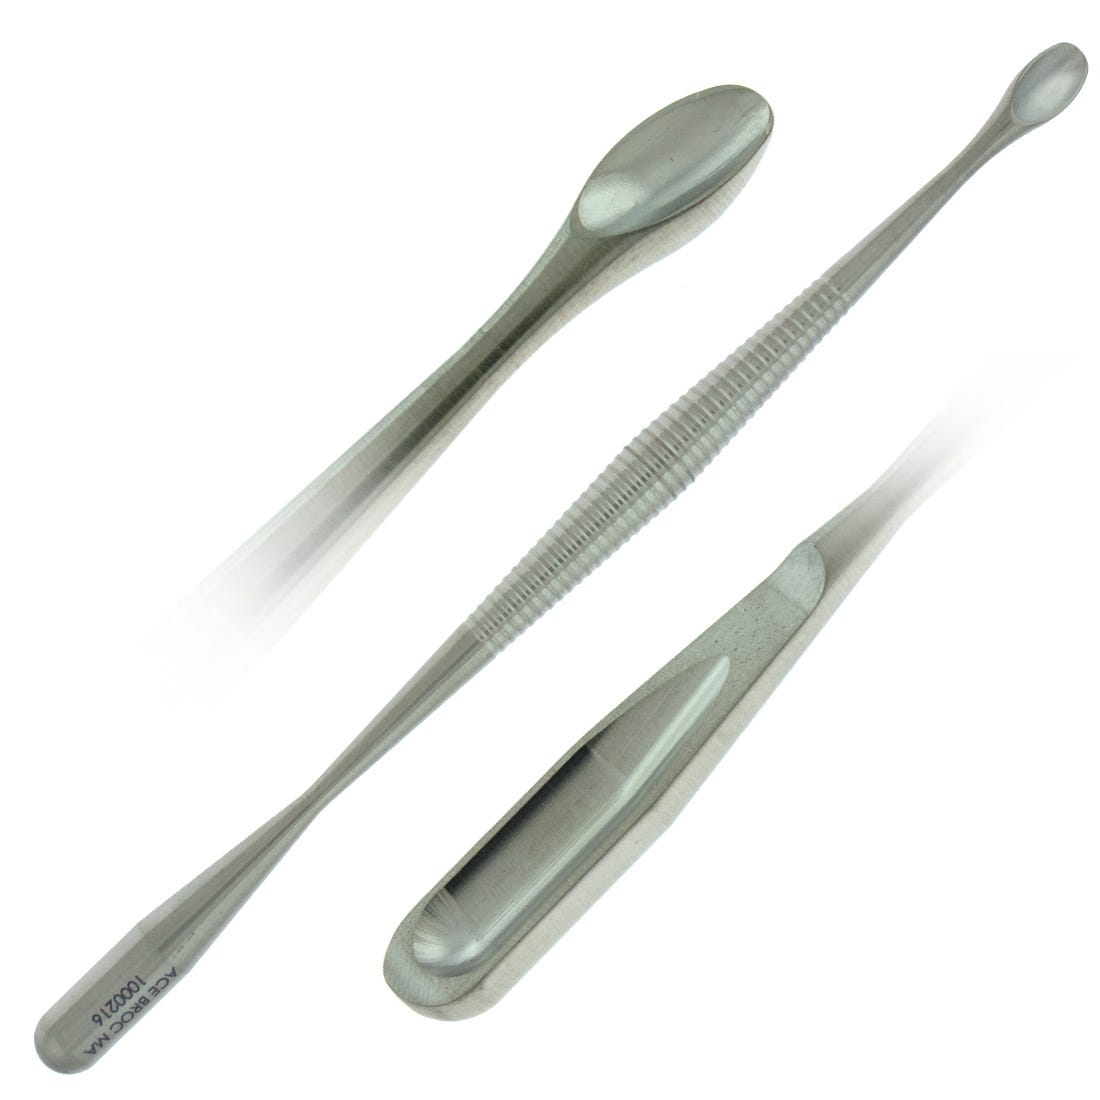 ACE Implant Curette with round cups, titanium, tip sizes 5x10mm and 6x20mm cups